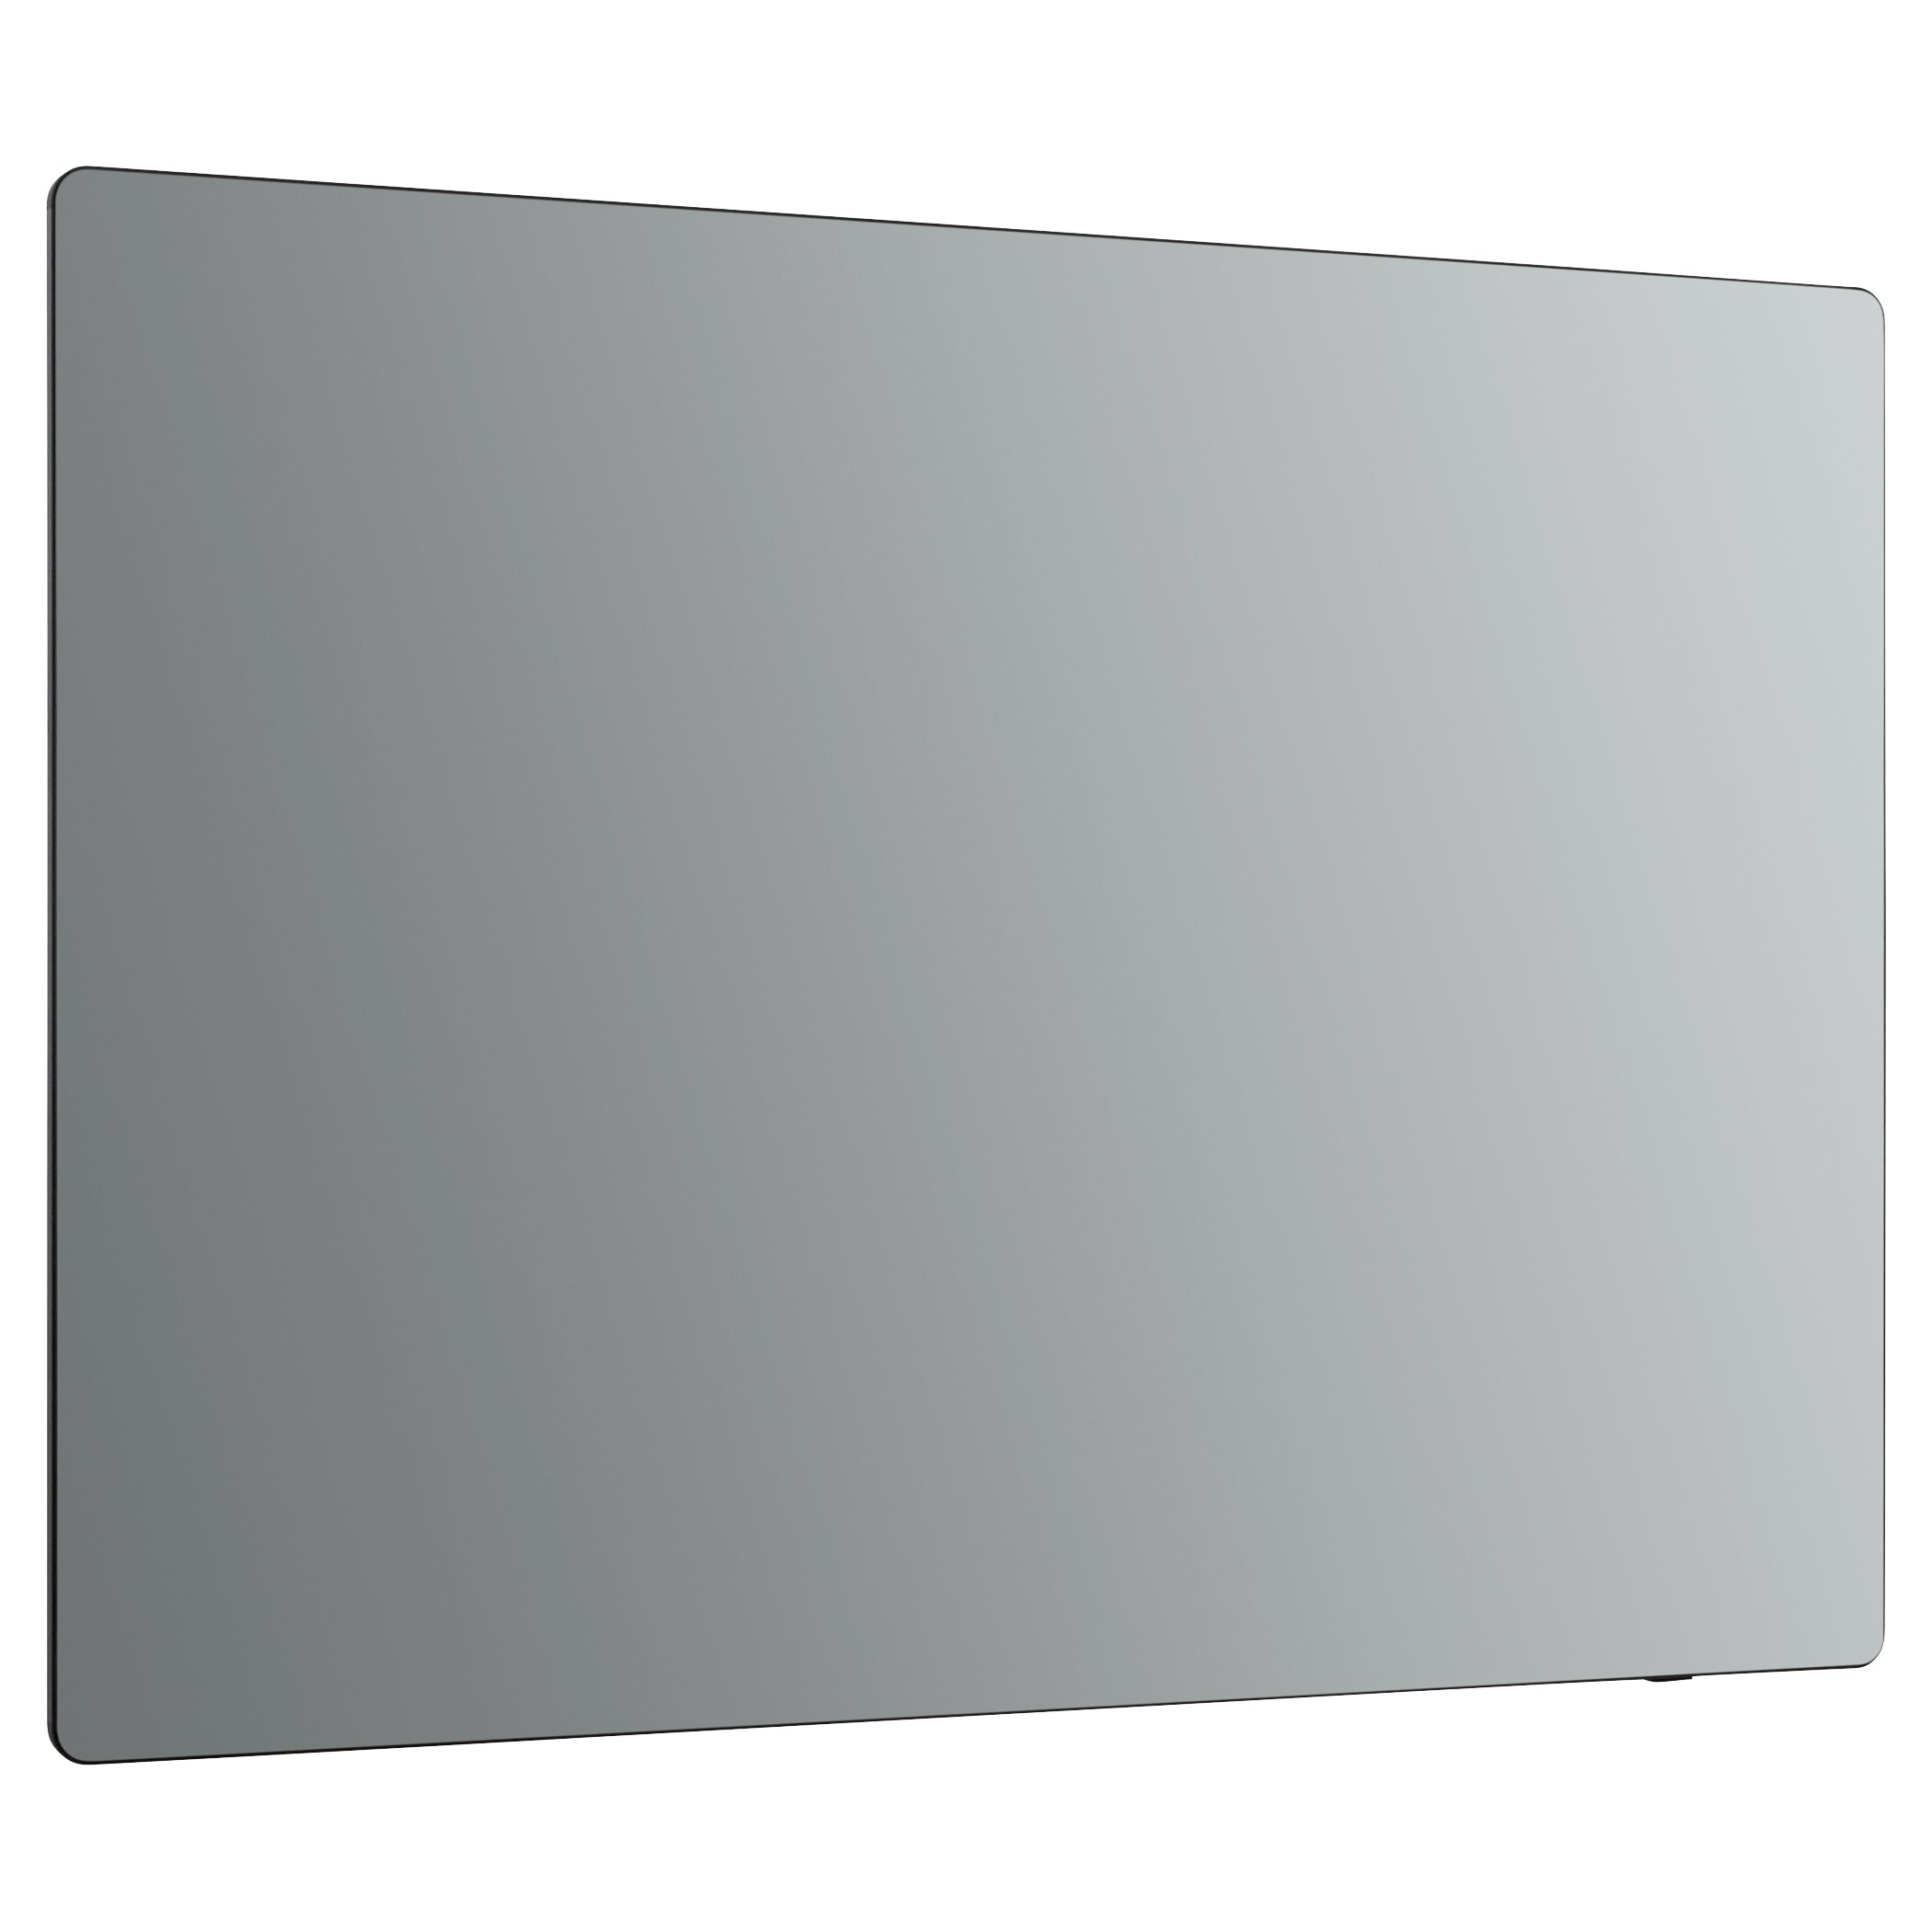 Oxygen Compact 3-0403-15 Mirrors - Black N/a